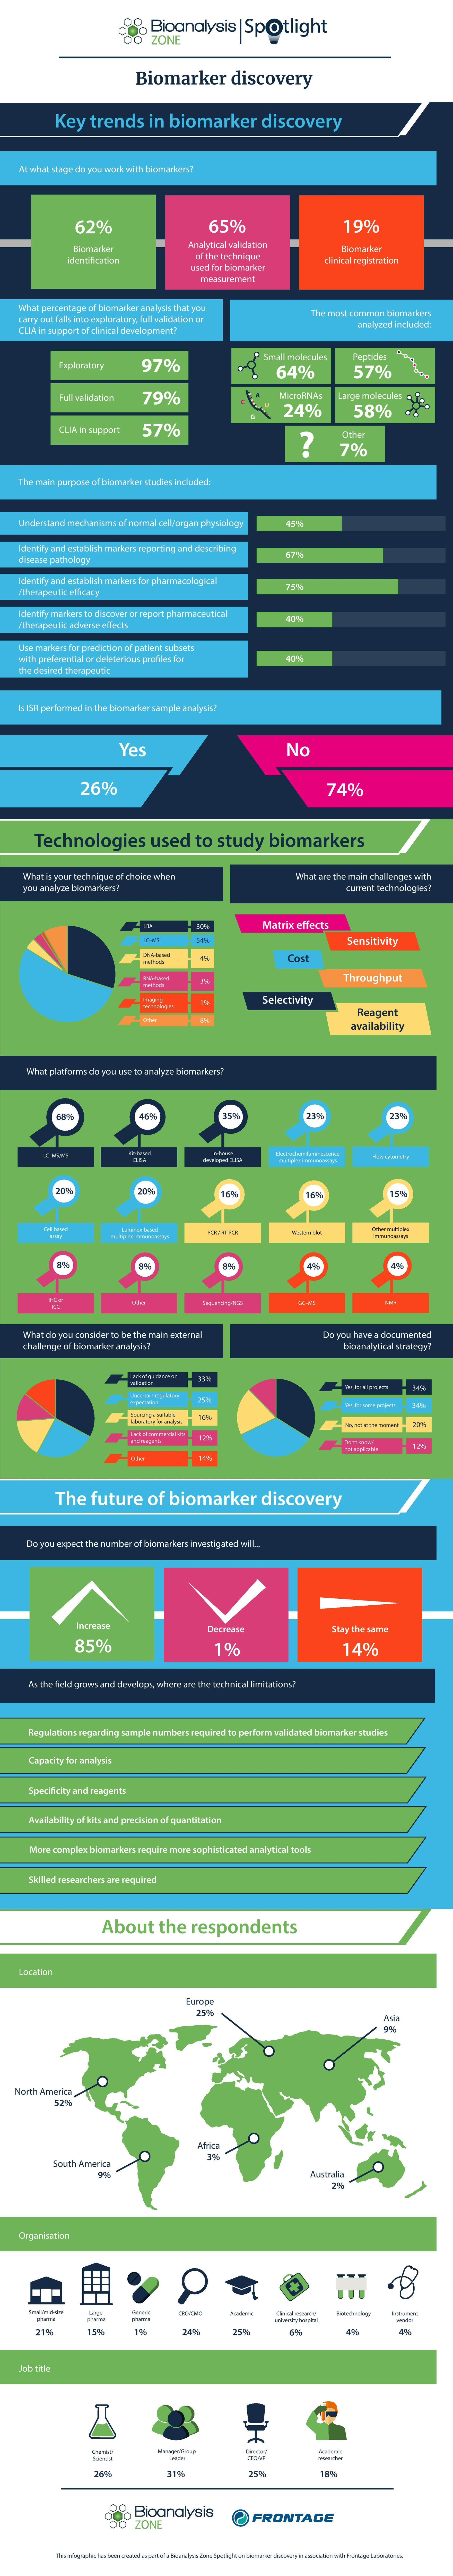 biomarker discovery infographic